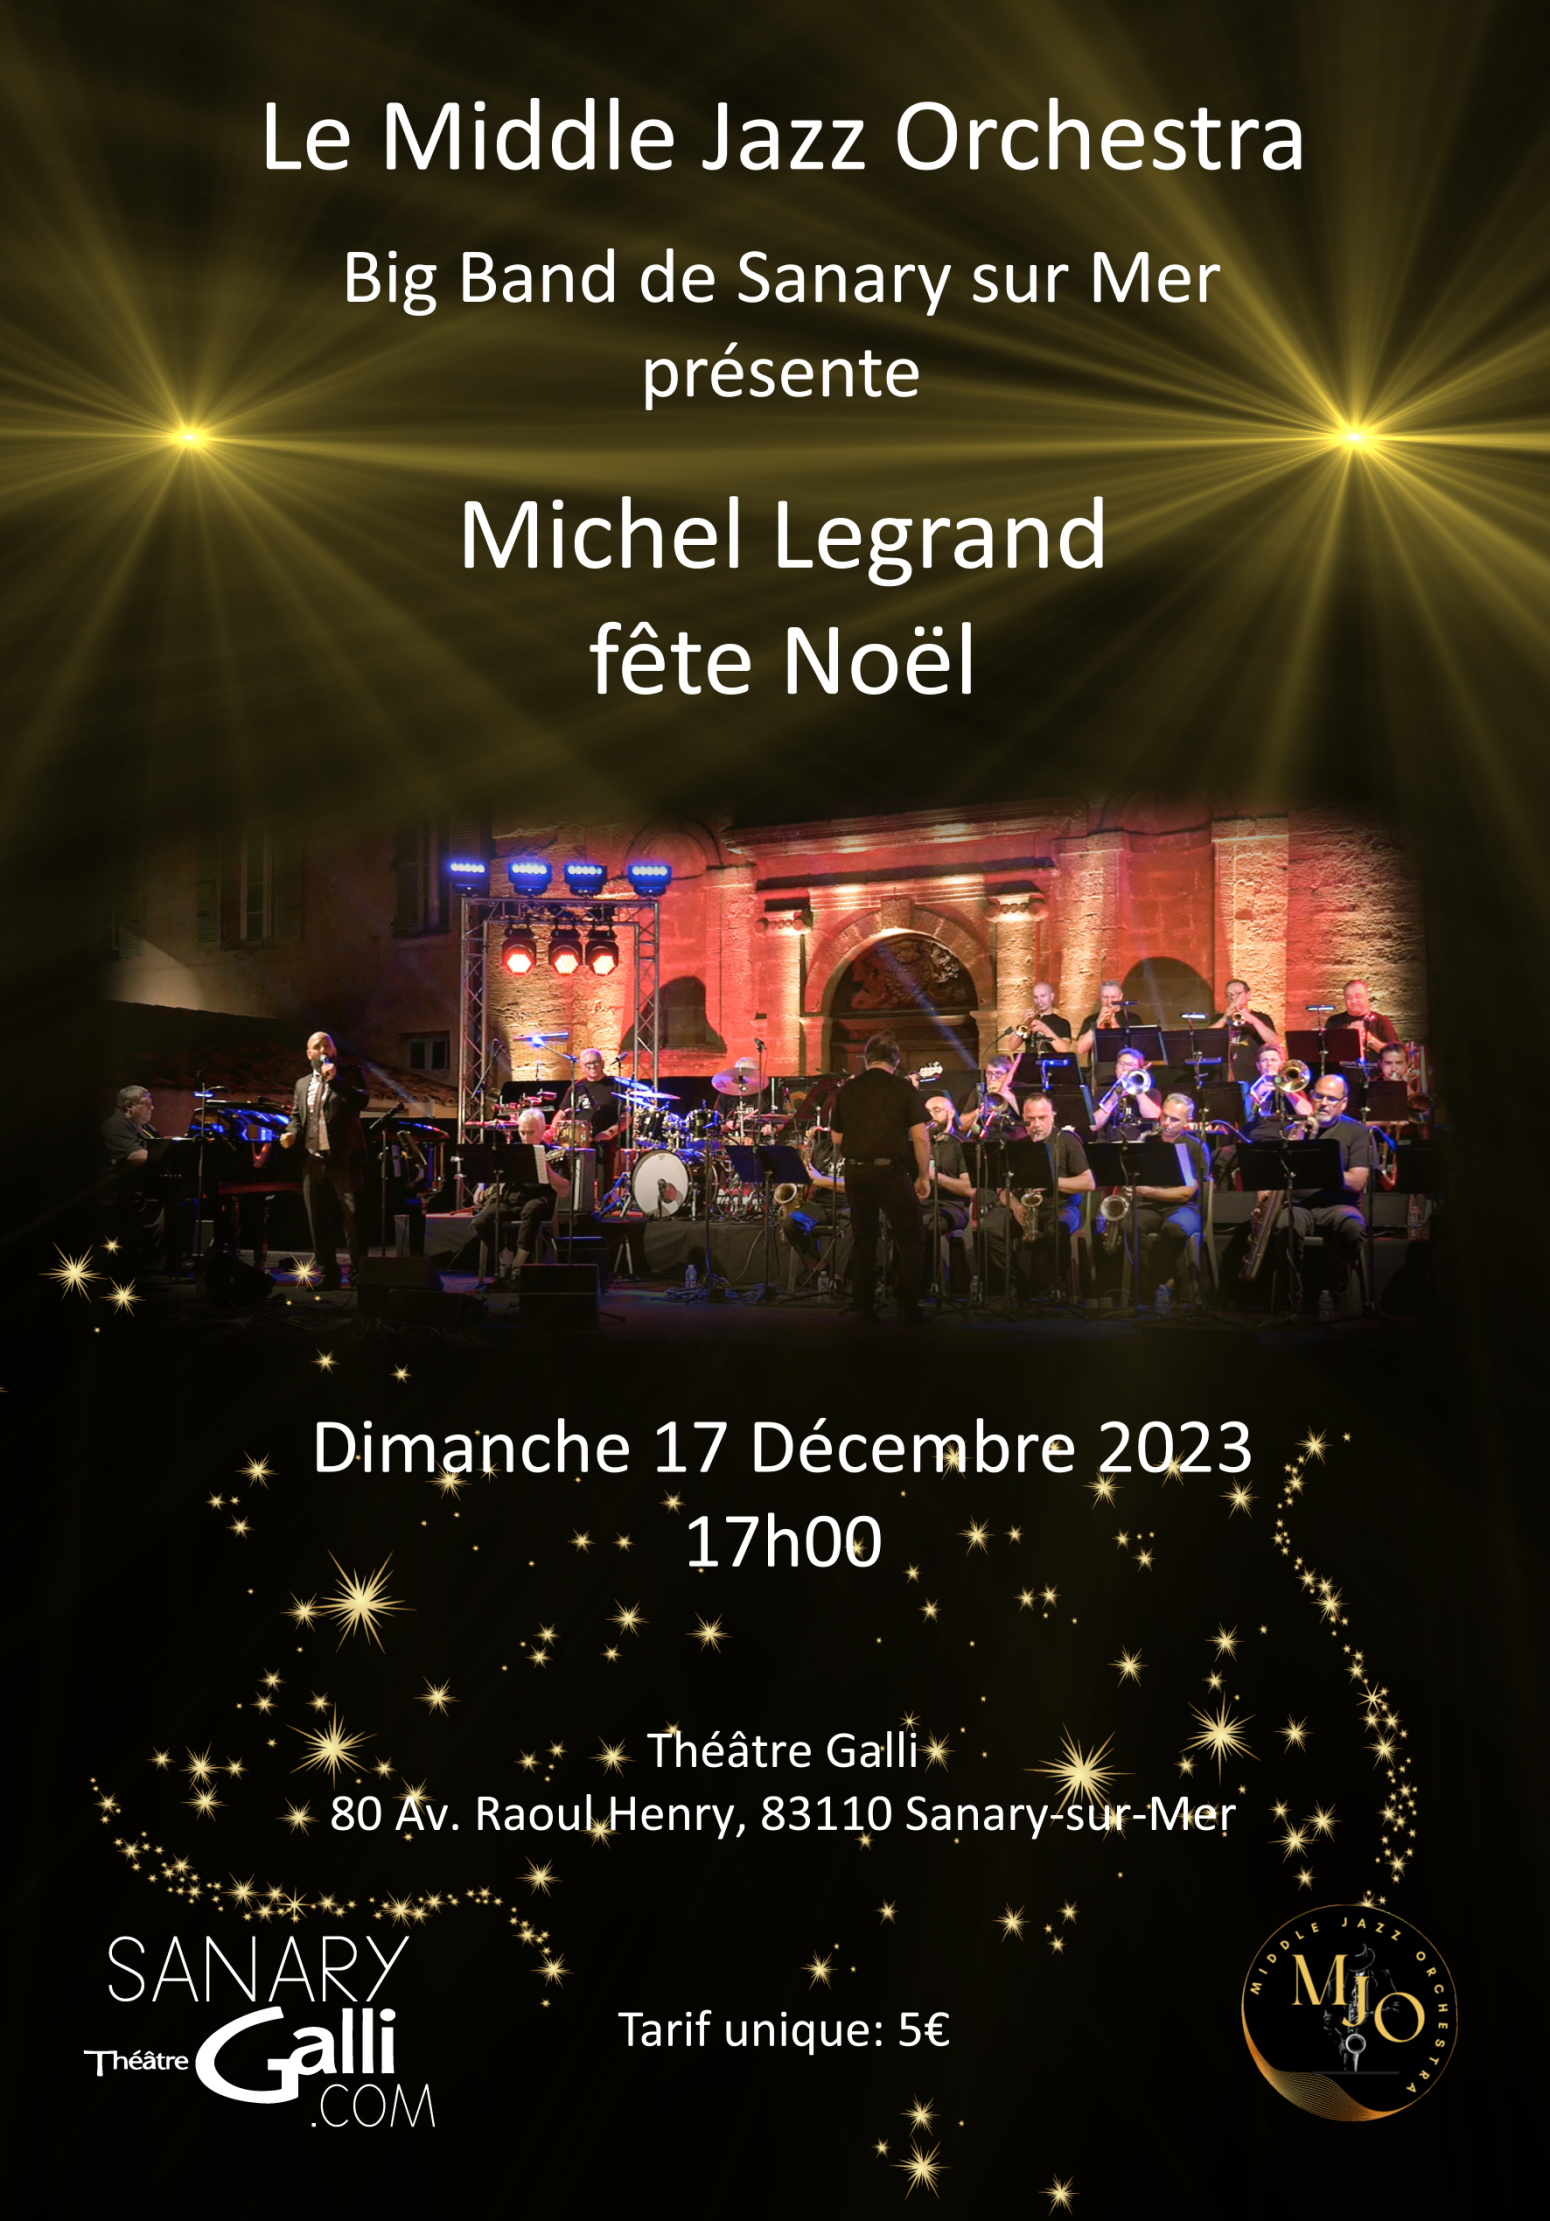 Middle jazz orchestra 1223 Michel-Le-grand-fete-Noel-Middle-Jazz-Orchestra